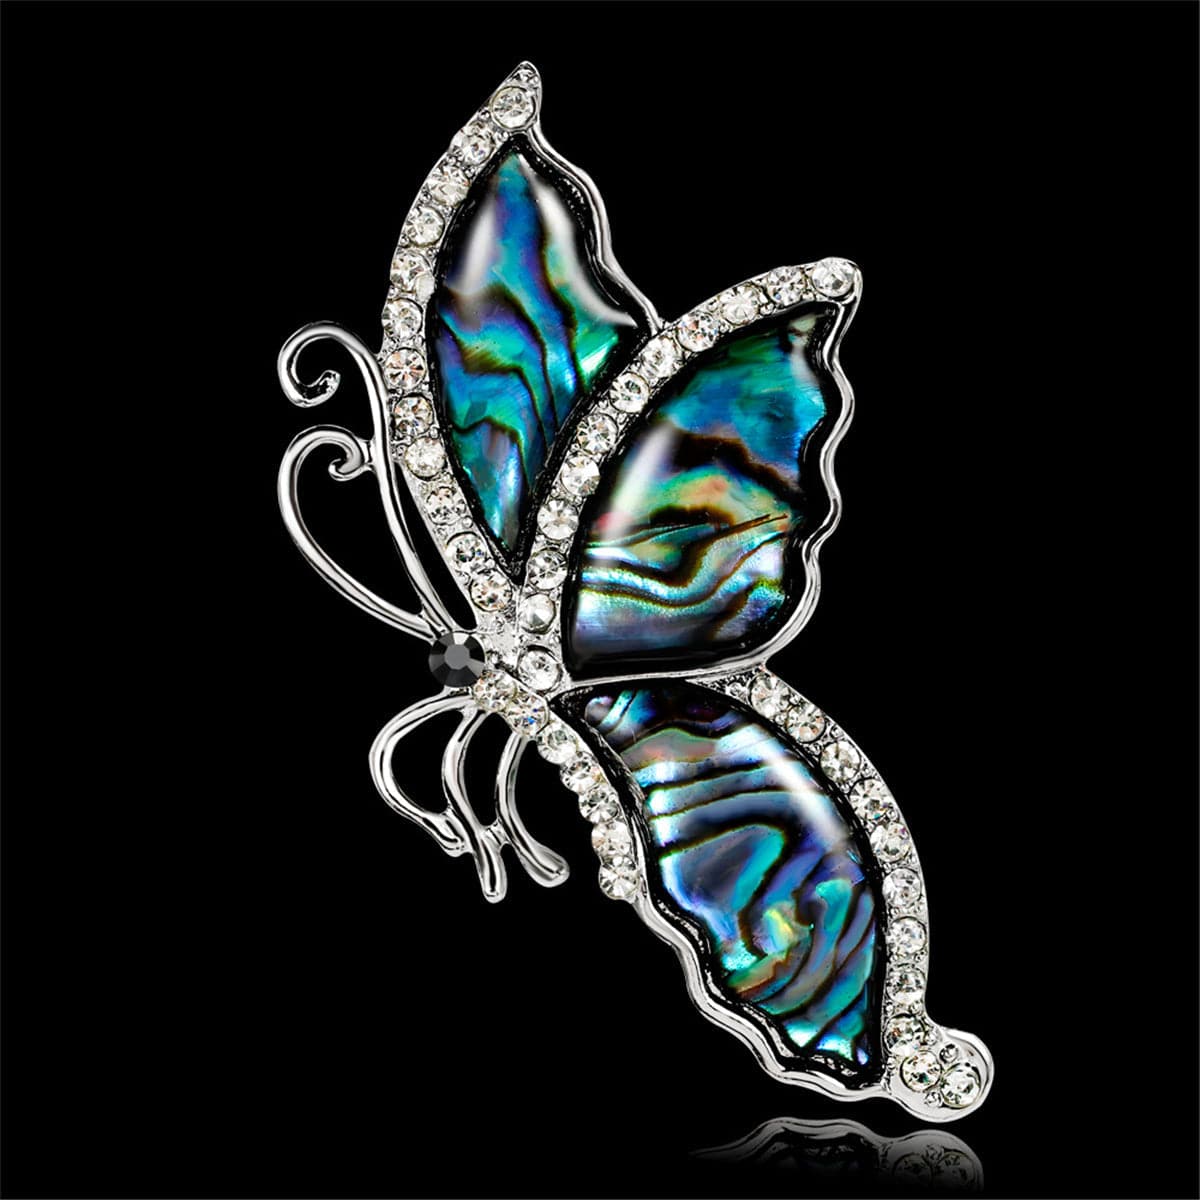 White Cubic Zirconia & Abalone Shell Butterfly Brooch